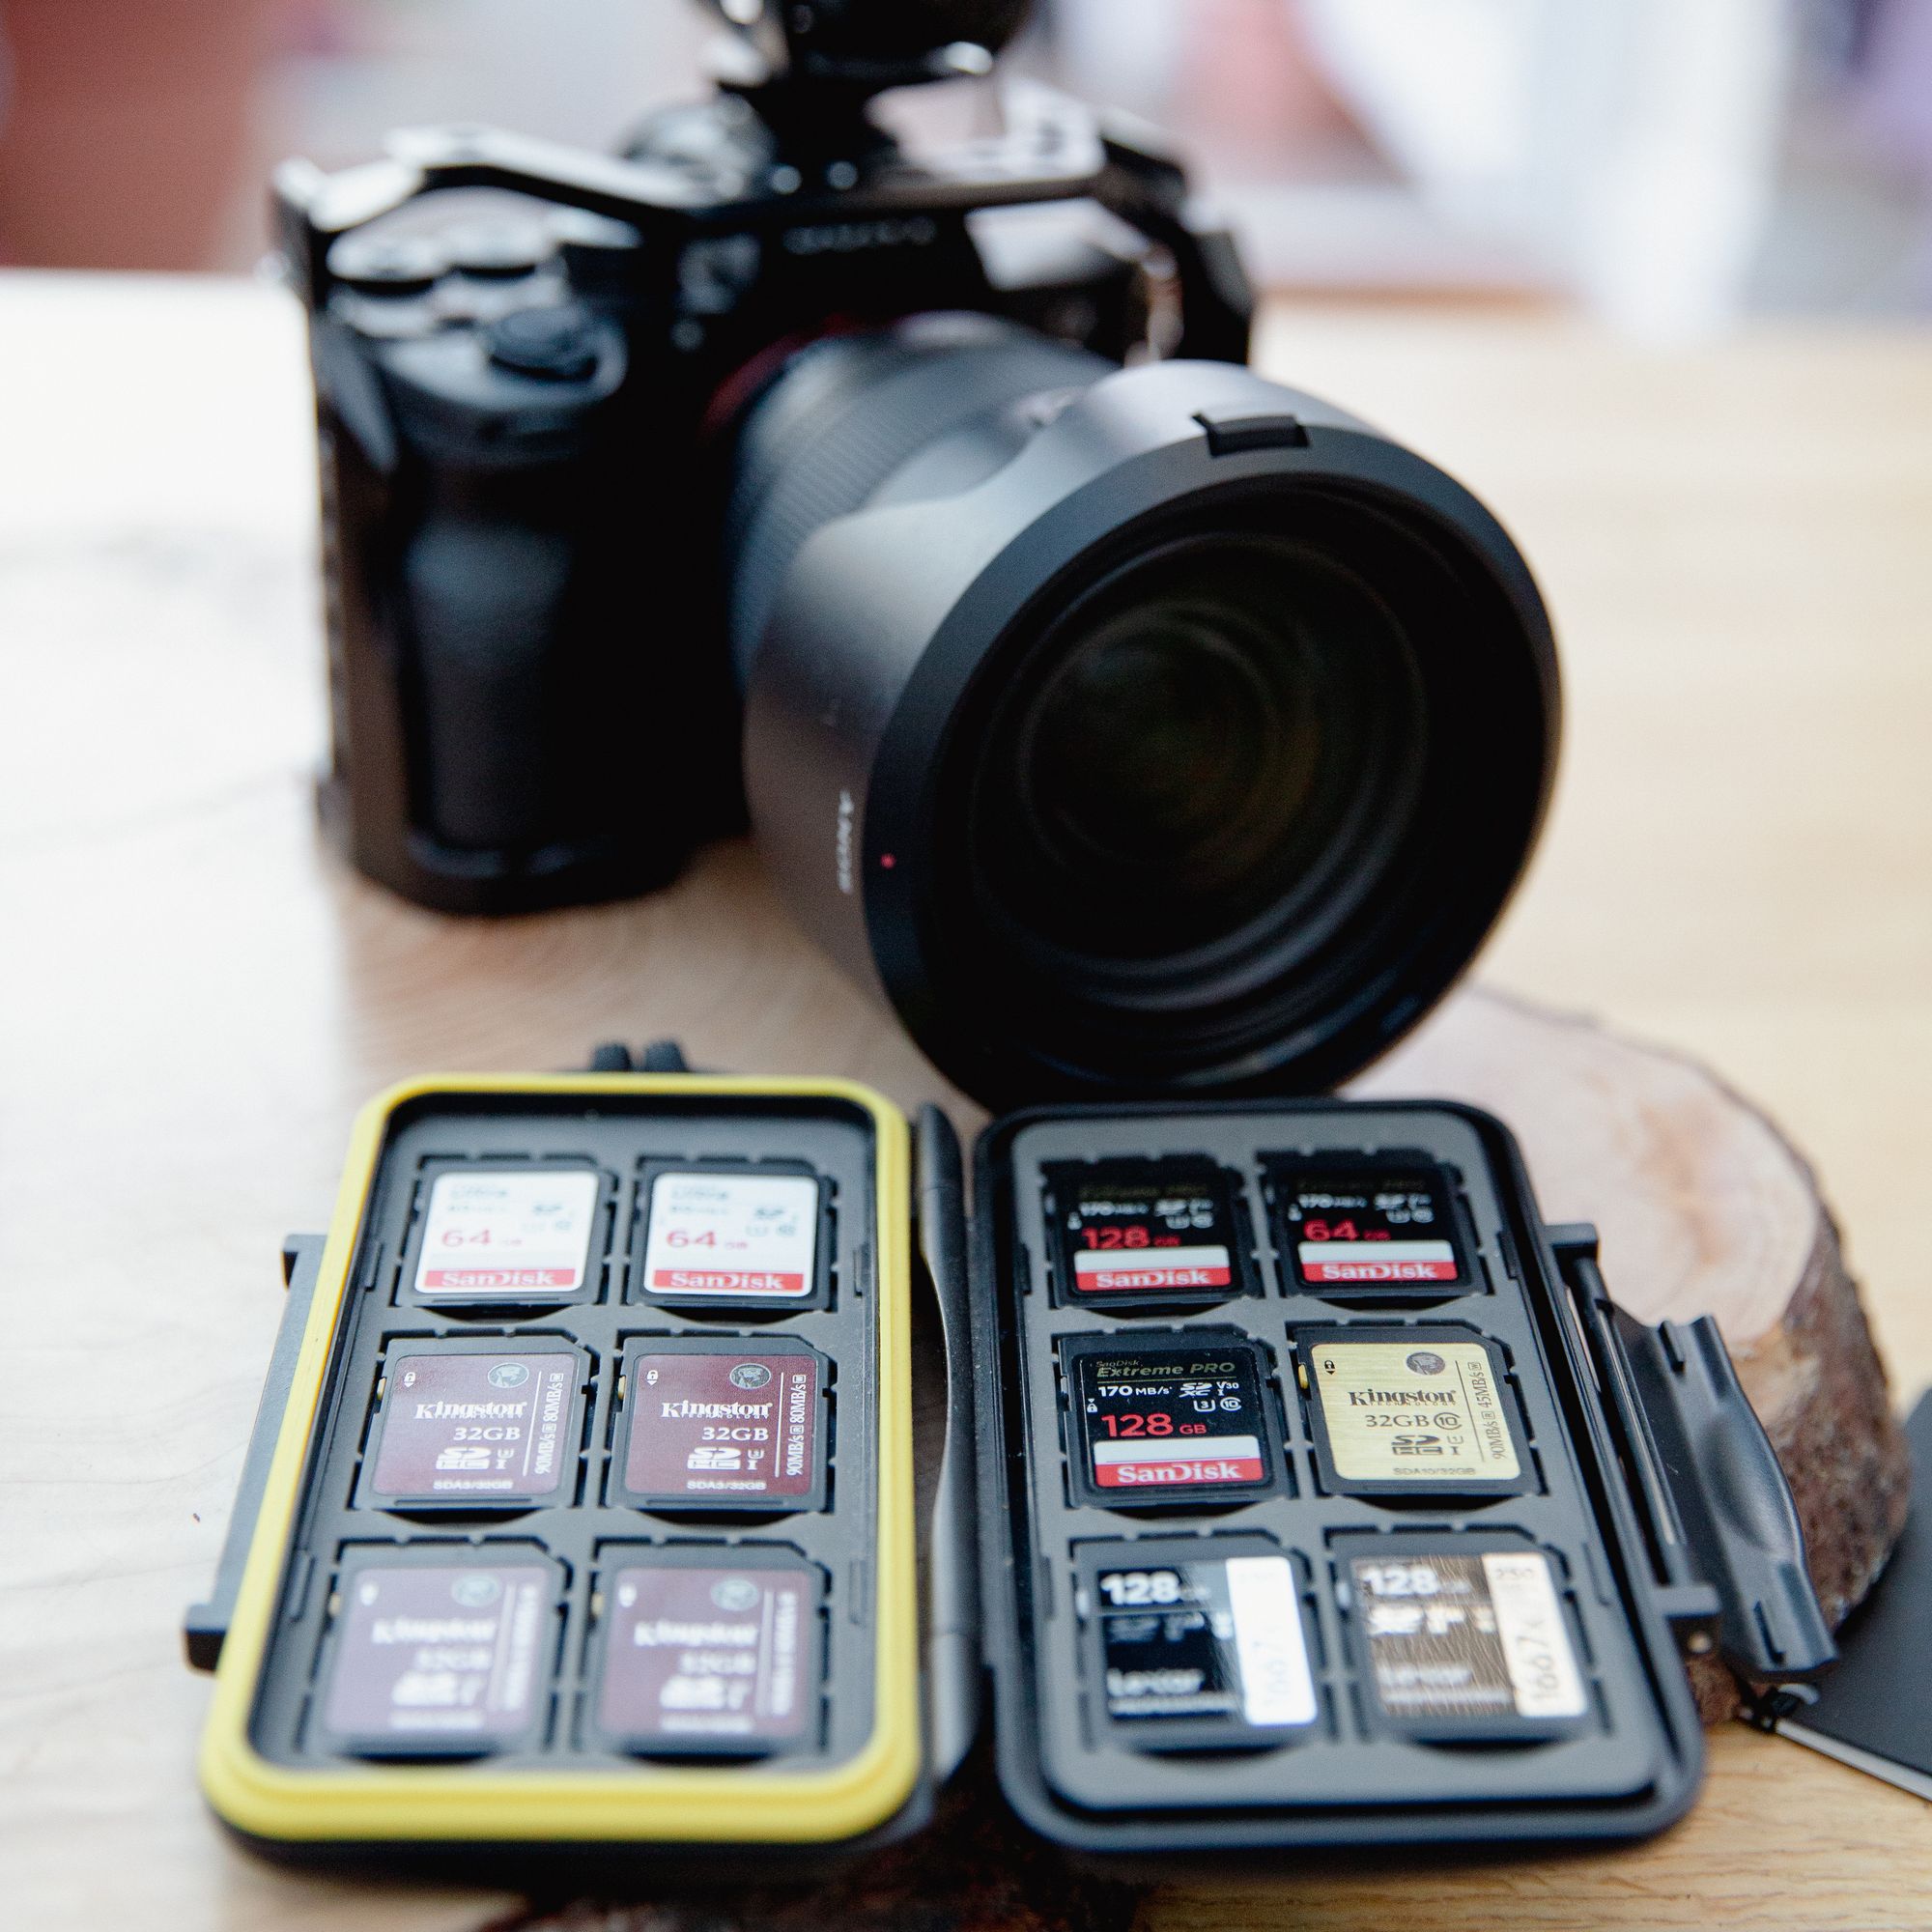 In the foreground are multiple SD cards in a case and in the background is a Sony A7SIII 4K camera with a Sony 24-70 lens